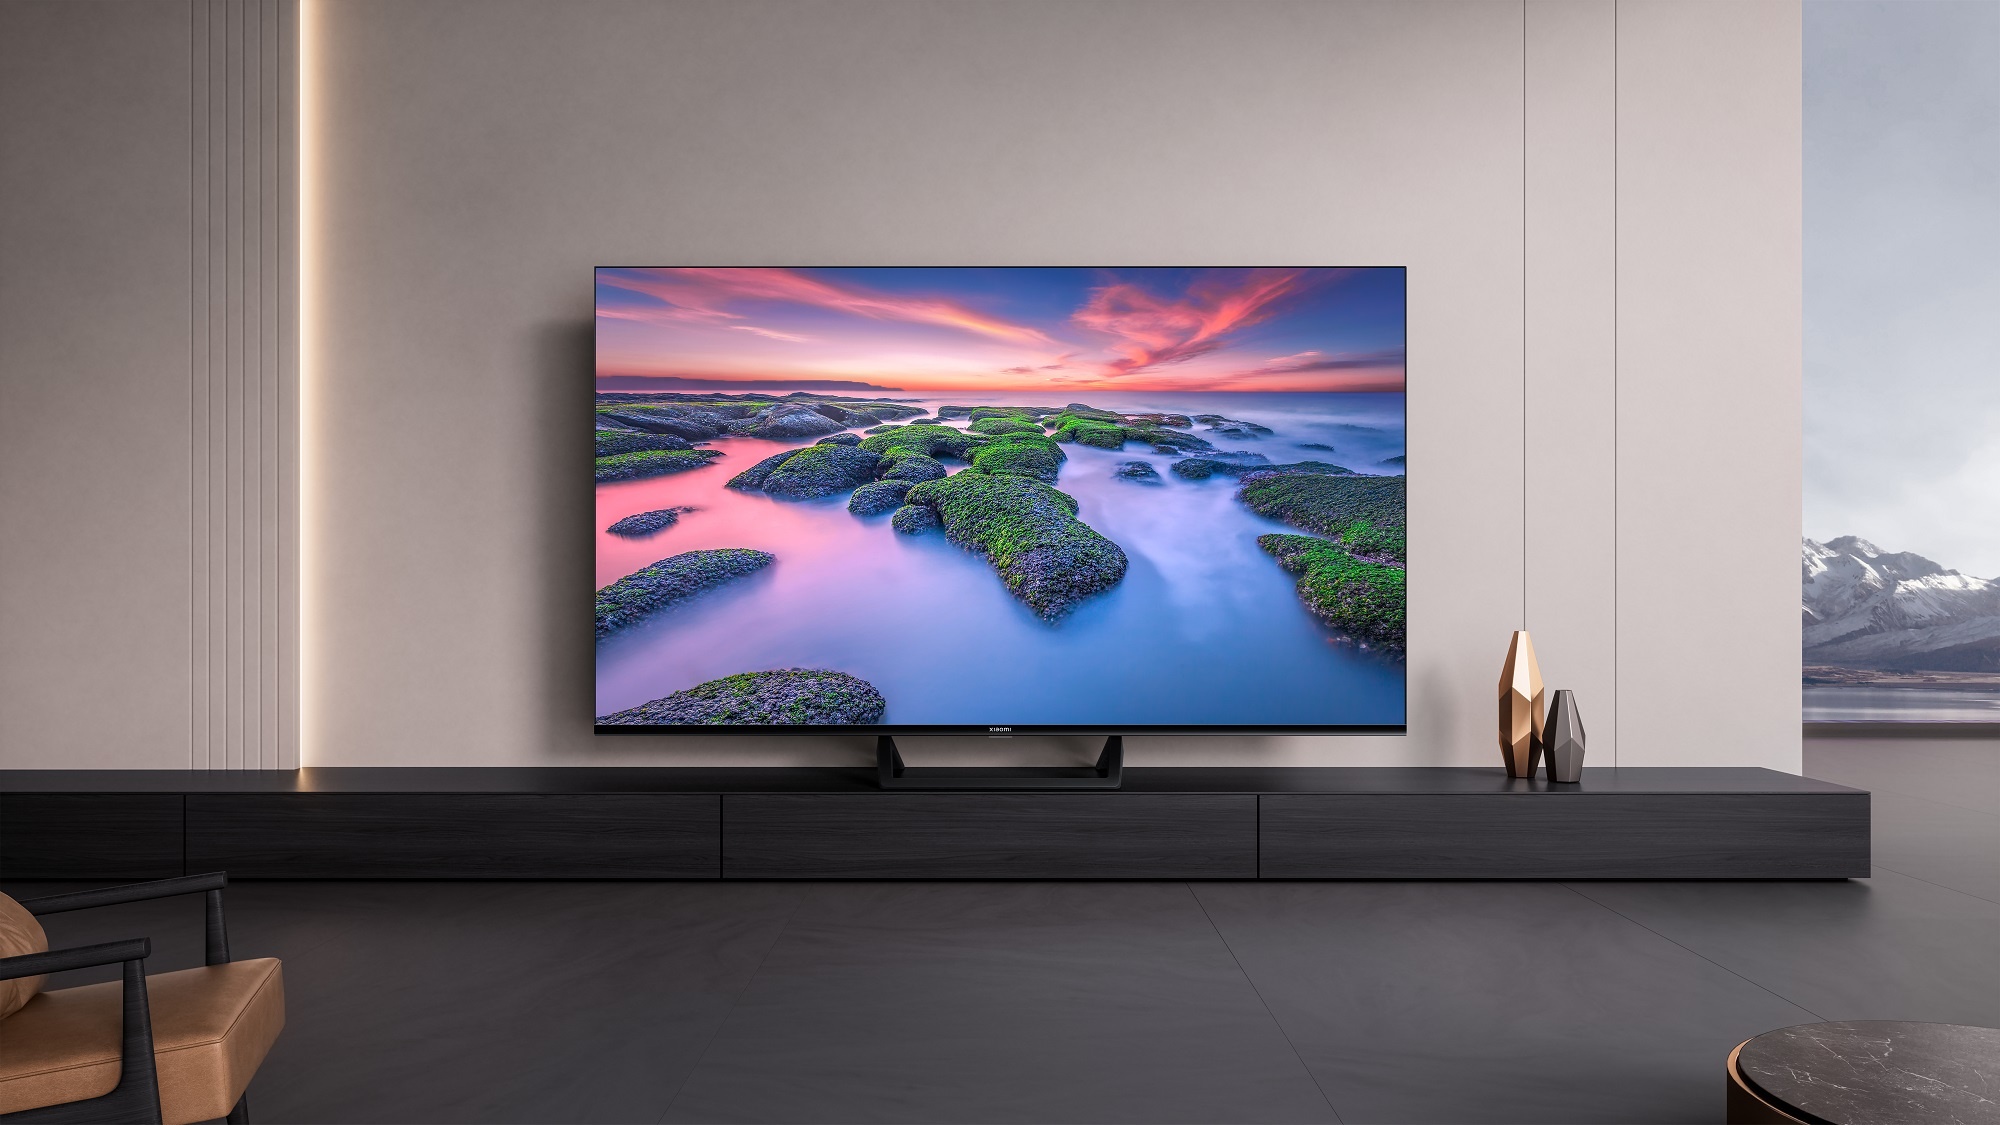 Xiaomi TV A2 43 inch, TV & Home Appliances, TV & Entertainment, TV on  Carousell